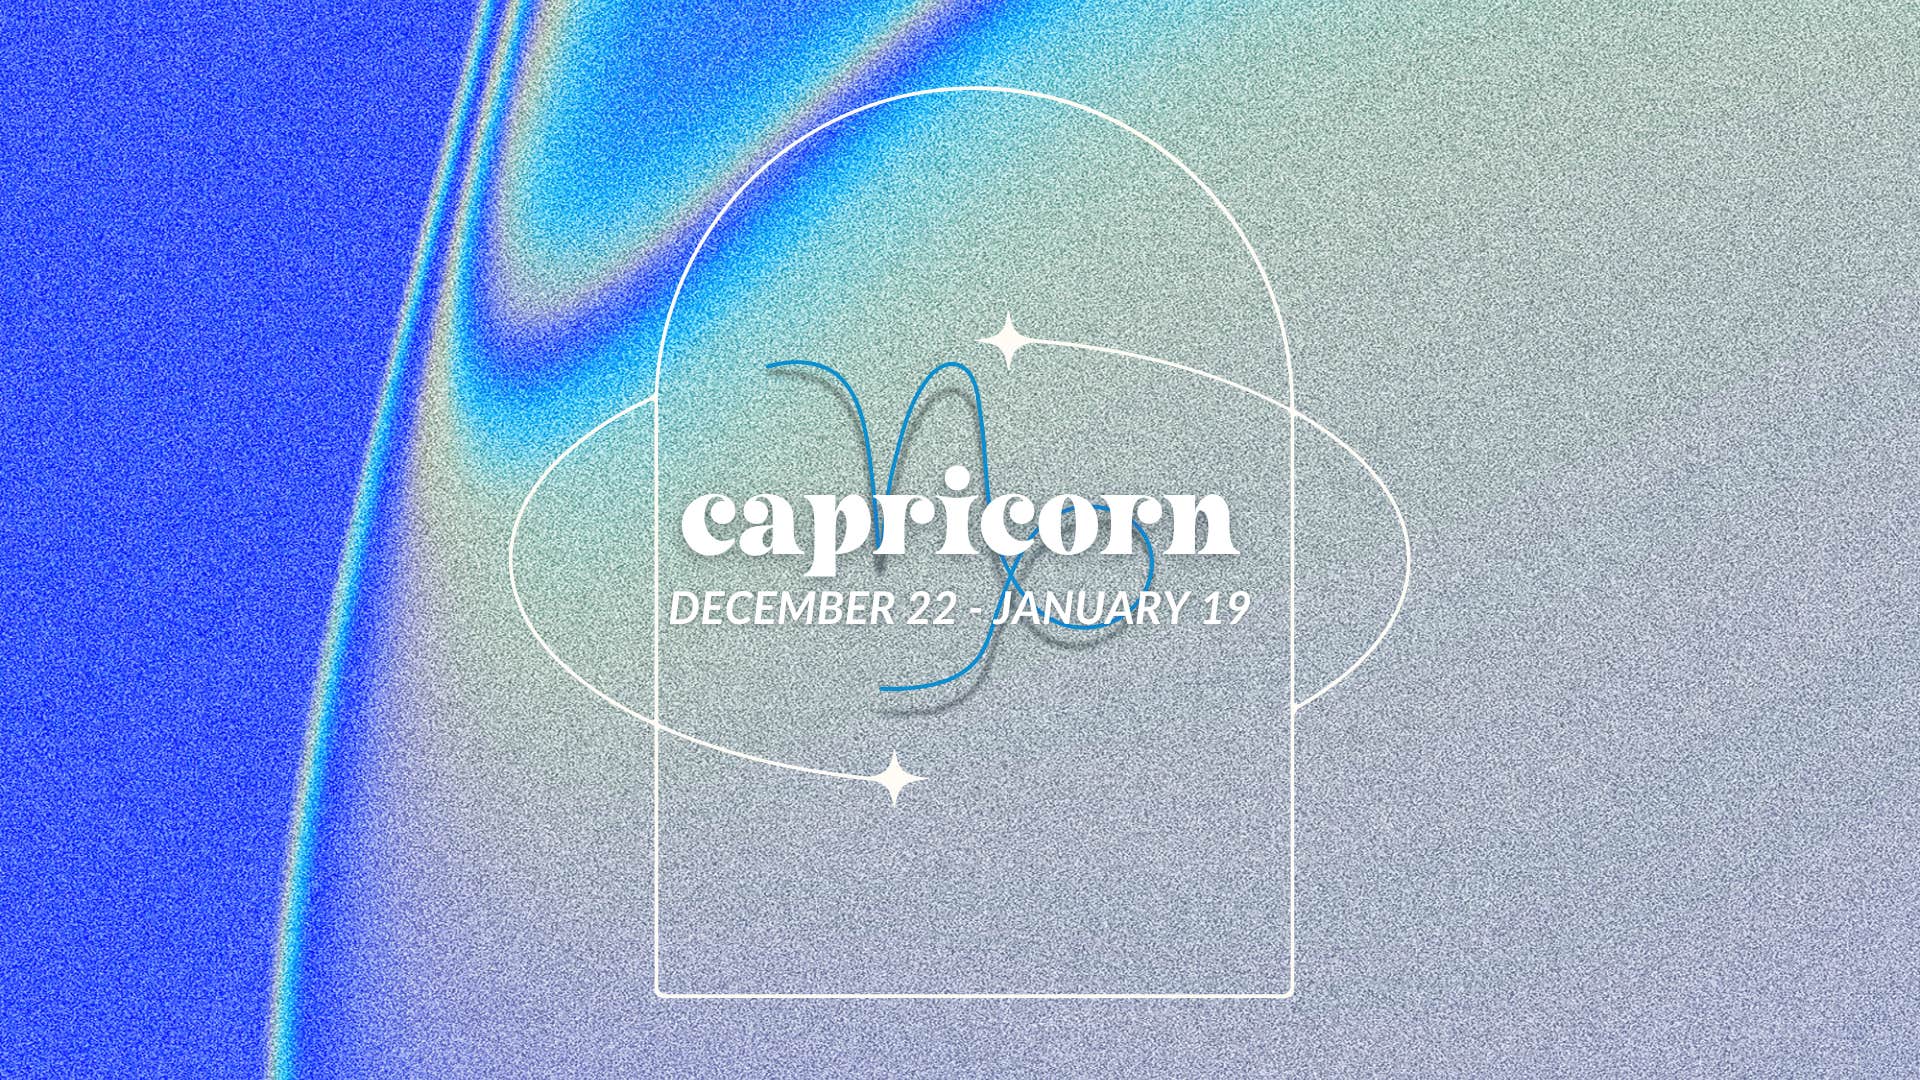 how the universe warns capricorn of change